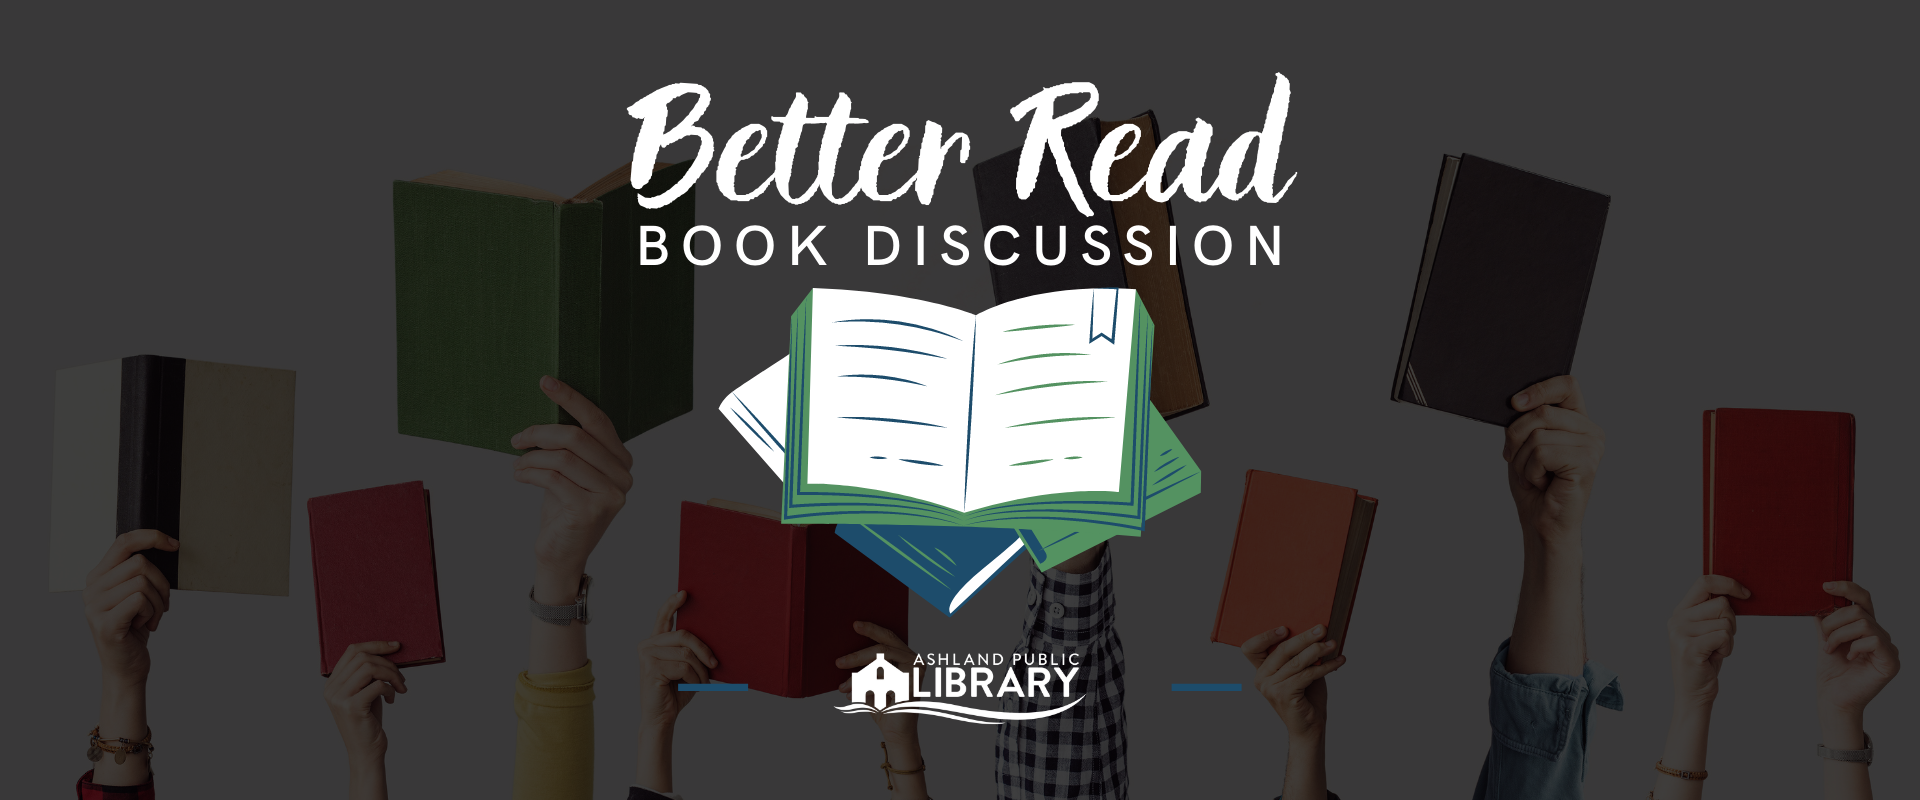 Better Read Book Discussion